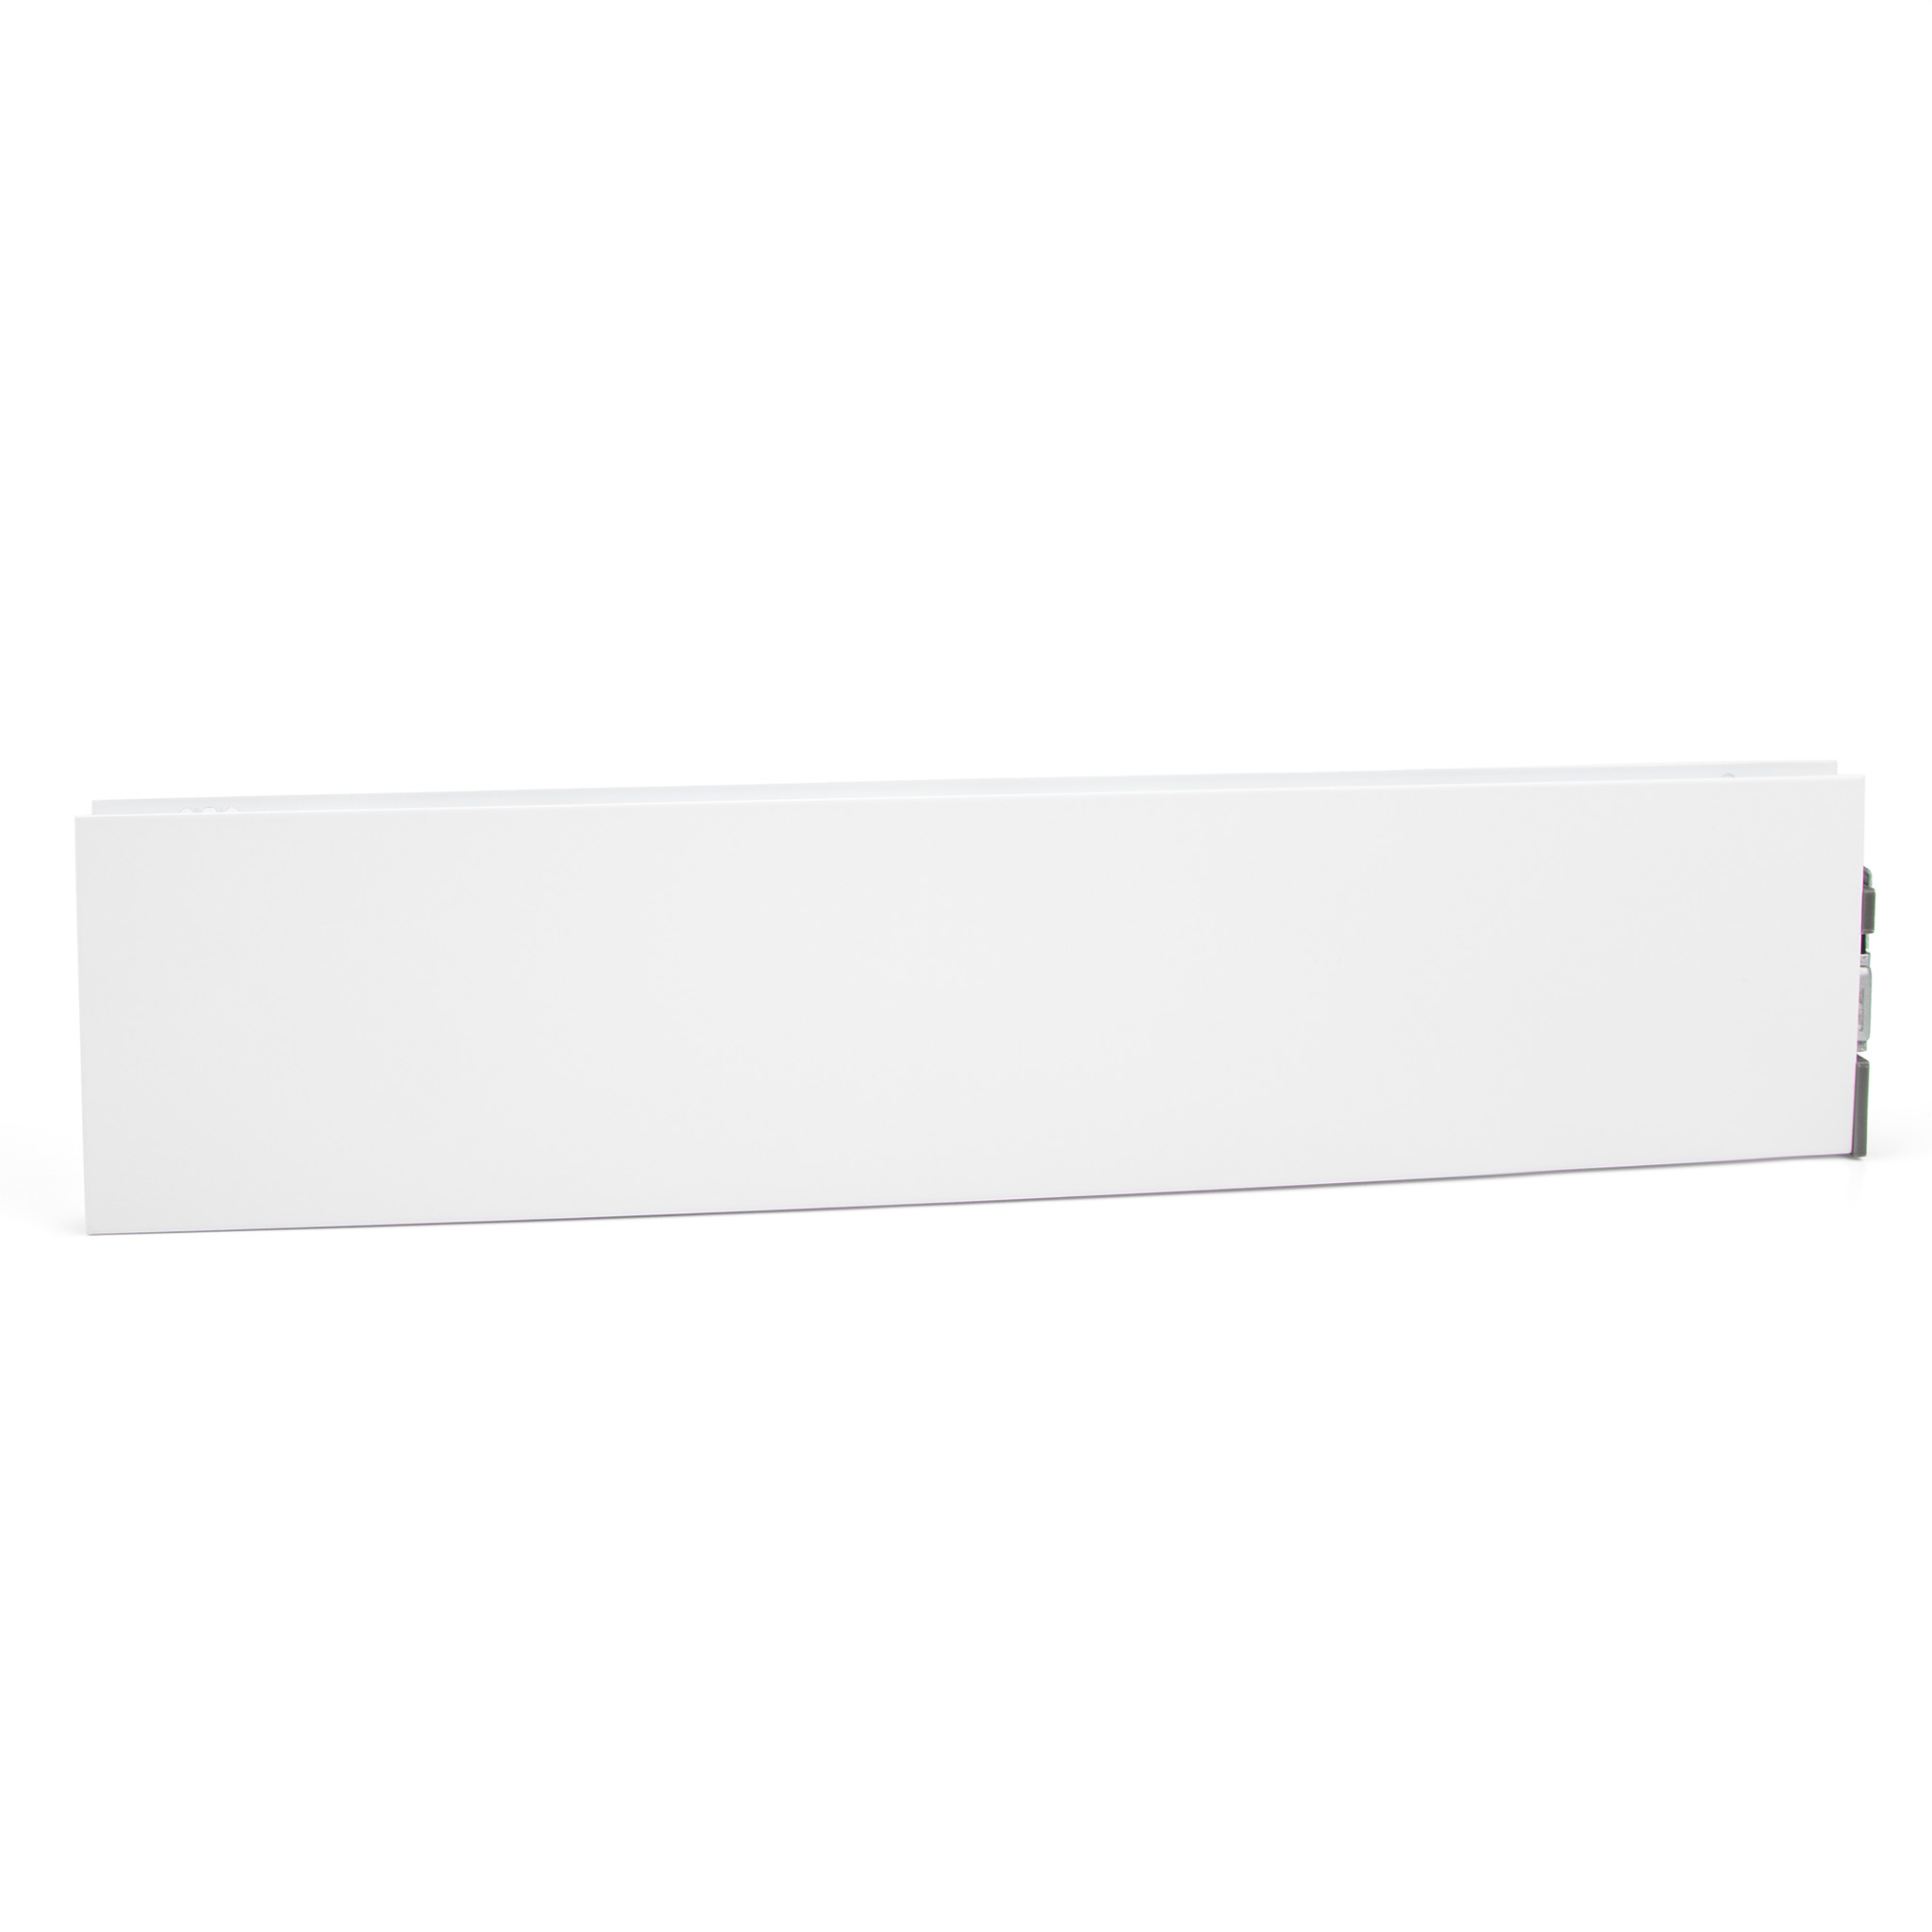 M-Series Fusion Side Wall, 450mm Length, 88mm Height, Lunar White